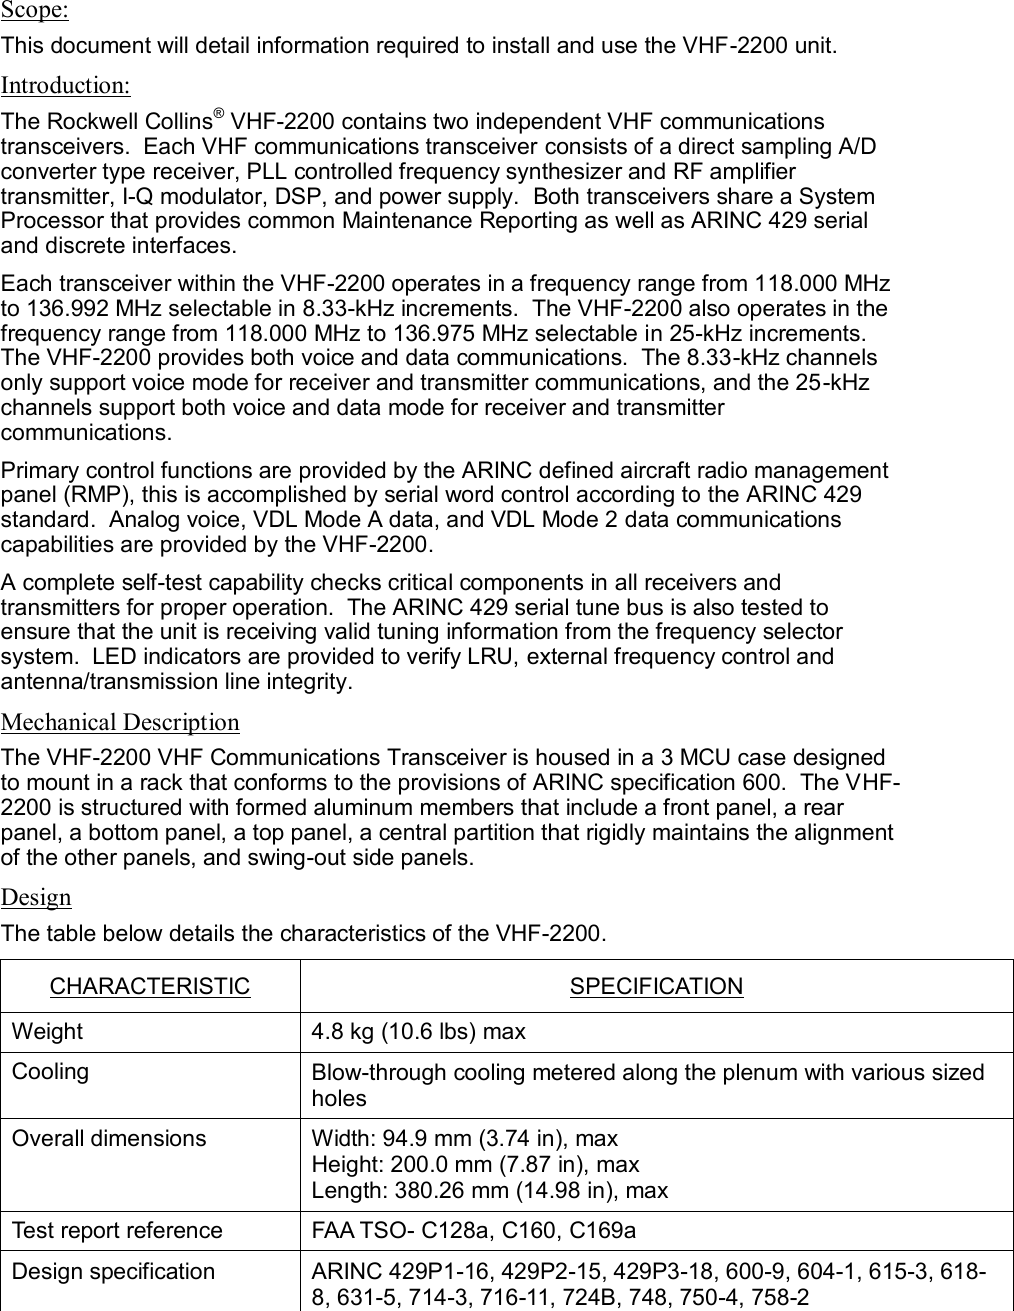  Scope: This document will detail information required to install and use the VHF-2200 unit. Introduction: The Rockwell Collins® VHF-2200 contains two independent VHF communications transceivers.  Each VHF communications transceiver consists of a direct sampling A/D converter type receiver, PLL controlled frequency synthesizer and RF amplifier transmitter, I-Q modulator, DSP, and power supply.  Both transceivers share a System Processor that provides common Maintenance Reporting as well as ARINC 429 serial and discrete interfaces. Each transceiver within the VHF-2200 operates in a frequency range from 118.000 MHz to 136.992 MHz selectable in 8.33-kHz increments.  The VHF-2200 also operates in the frequency range from 118.000 MHz to 136.975 MHz selectable in 25-kHz increments.  The VHF-2200 provides both voice and data communications.  The 8.33-kHz channels only support voice mode for receiver and transmitter communications, and the 25-kHz channels support both voice and data mode for receiver and transmitter communications.   Primary control functions are provided by the ARINC defined aircraft radio management panel (RMP), this is accomplished by serial word control according to the ARINC 429 standard.  Analog voice, VDL Mode A data, and VDL Mode 2 data communications capabilities are provided by the VHF-2200. A complete self-test capability checks critical components in all receivers and transmitters for proper operation.  The ARINC 429 serial tune bus is also tested to ensure that the unit is receiving valid tuning information from the frequency selector system.  LED indicators are provided to verify LRU, external frequency control and antenna/transmission line integrity. Mechanical Description The VHF-2200 VHF Communications Transceiver is housed in a 3 MCU case designed to mount in a rack that conforms to the provisions of ARINC specification 600.  The VHF-2200 is structured with formed aluminum members that include a front panel, a rear panel, a bottom panel, a top panel, a central partition that rigidly maintains the alignment of the other panels, and swing-out side panels. Design The table below details the characteristics of the VHF-2200. CHARACTERISTIC SPECIFICATION Weight 4.8 kg (10.6 lbs) max Cooling Blow-through cooling metered along the plenum with various sized holes Overall dimensions Width: 94.9 mm (3.74 in), max Height: 200.0 mm (7.87 in), max Length: 380.26 mm (14.98 in), max   Test report reference FAA TSO- C128a, C160, C169a Design specification ARINC 429P1-16, 429P2-15, 429P3-18, 600-9, 604-1, 615-3, 618-8, 631-5, 714-3, 716-11, 724B, 748, 750-4, 758-2 